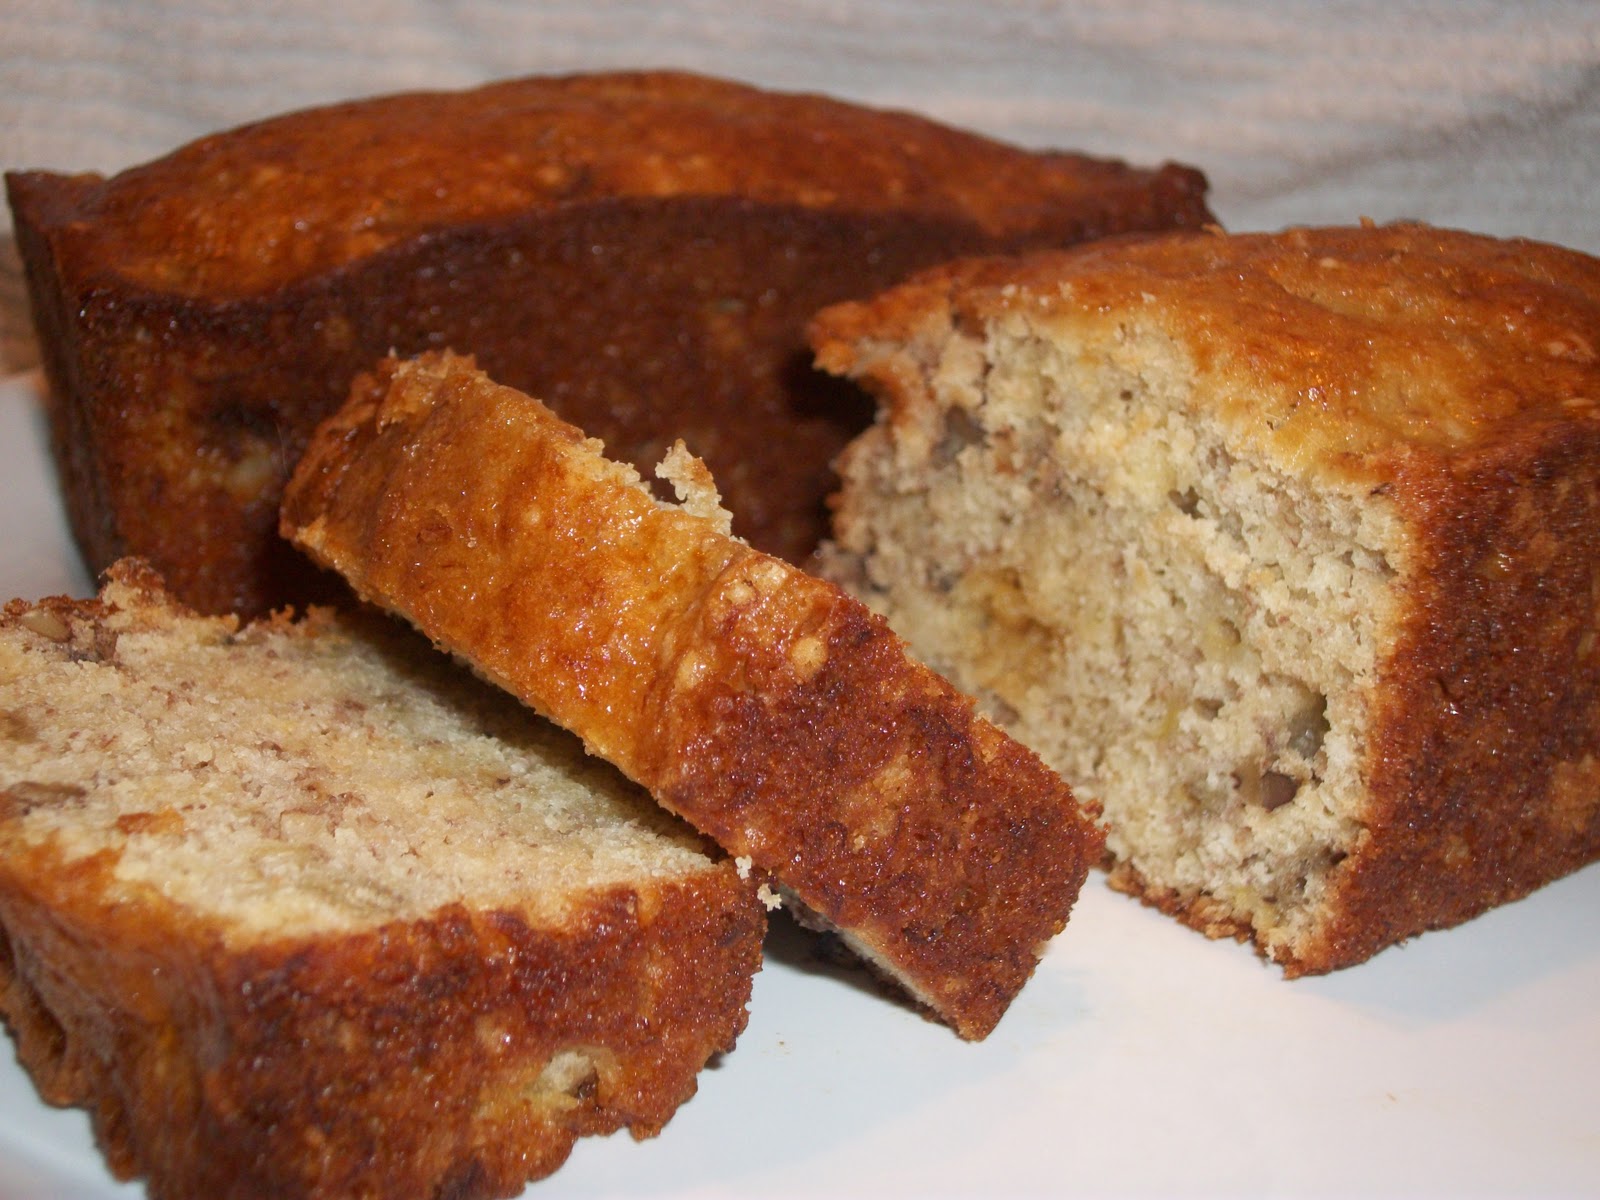 Easy Banana Bread using a Boxed Cake Mix - Around My Family Table